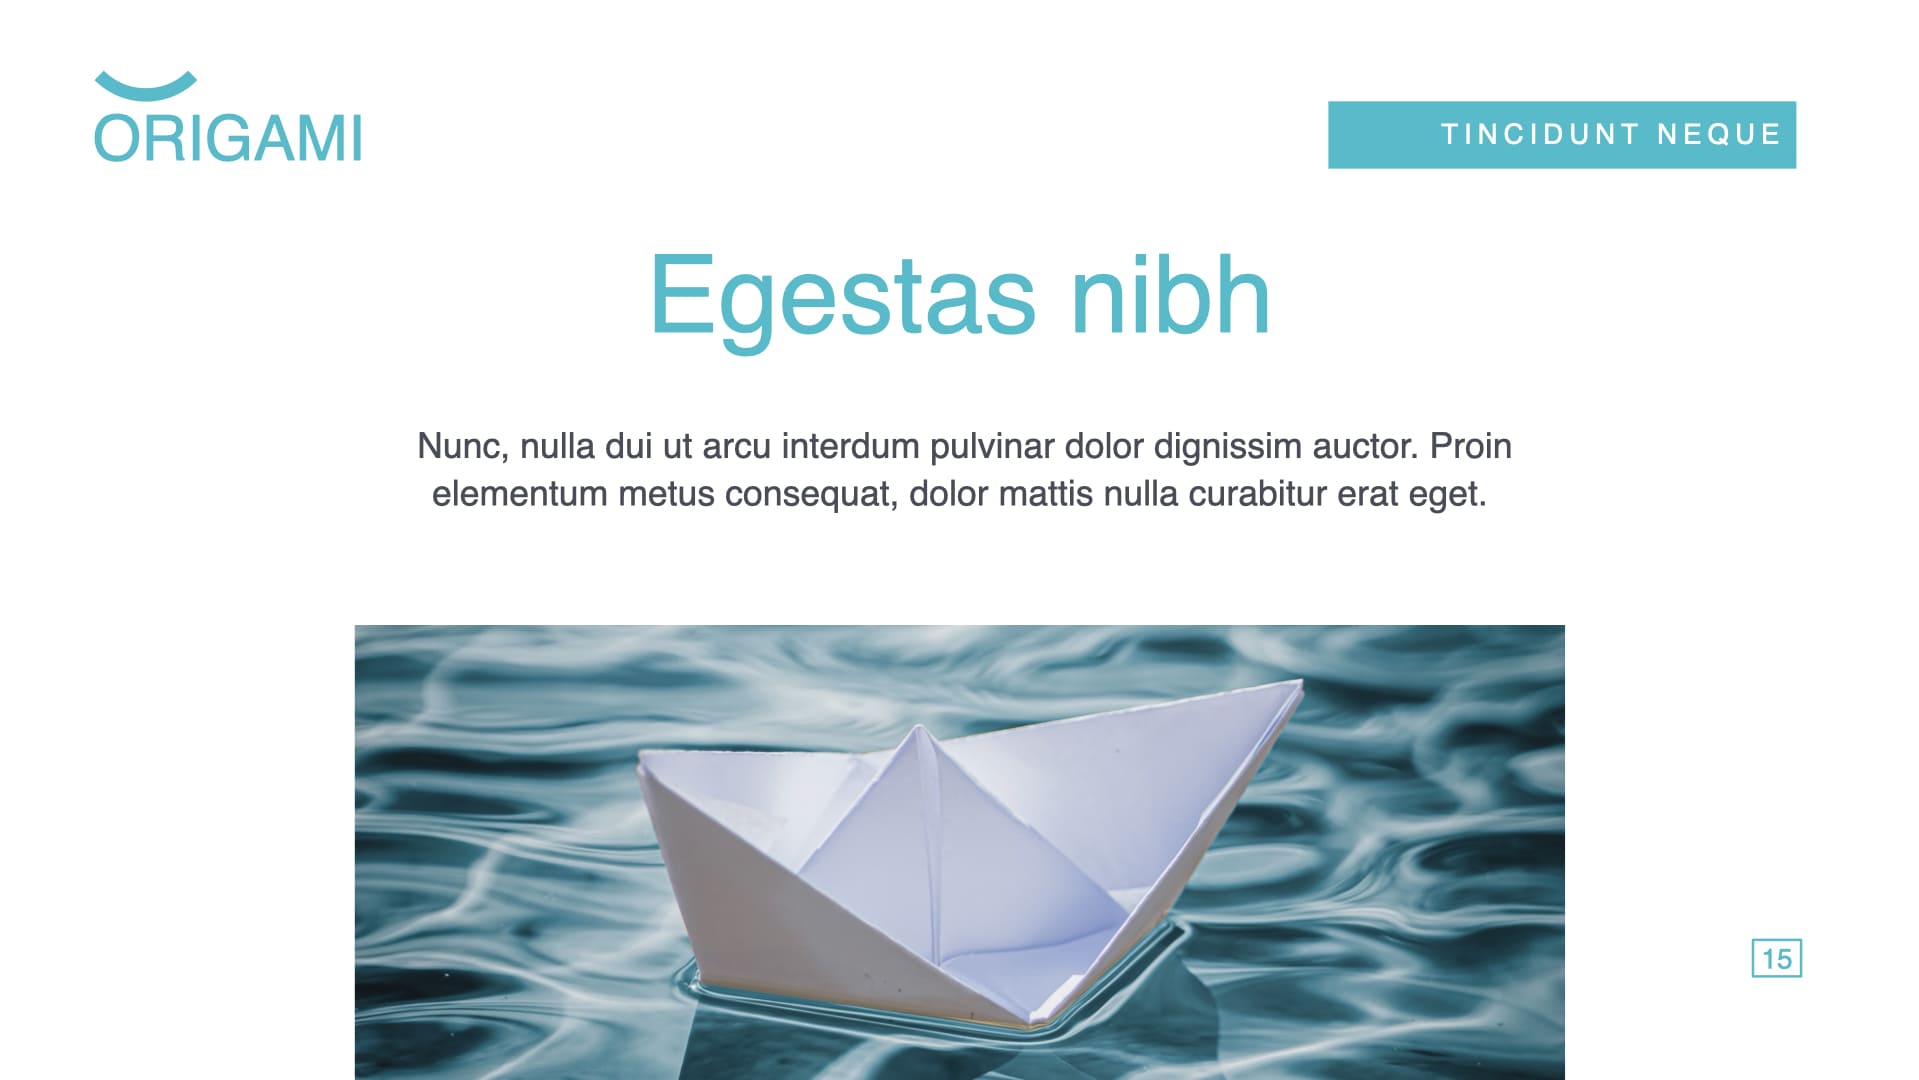 Illustration with ship and text block.